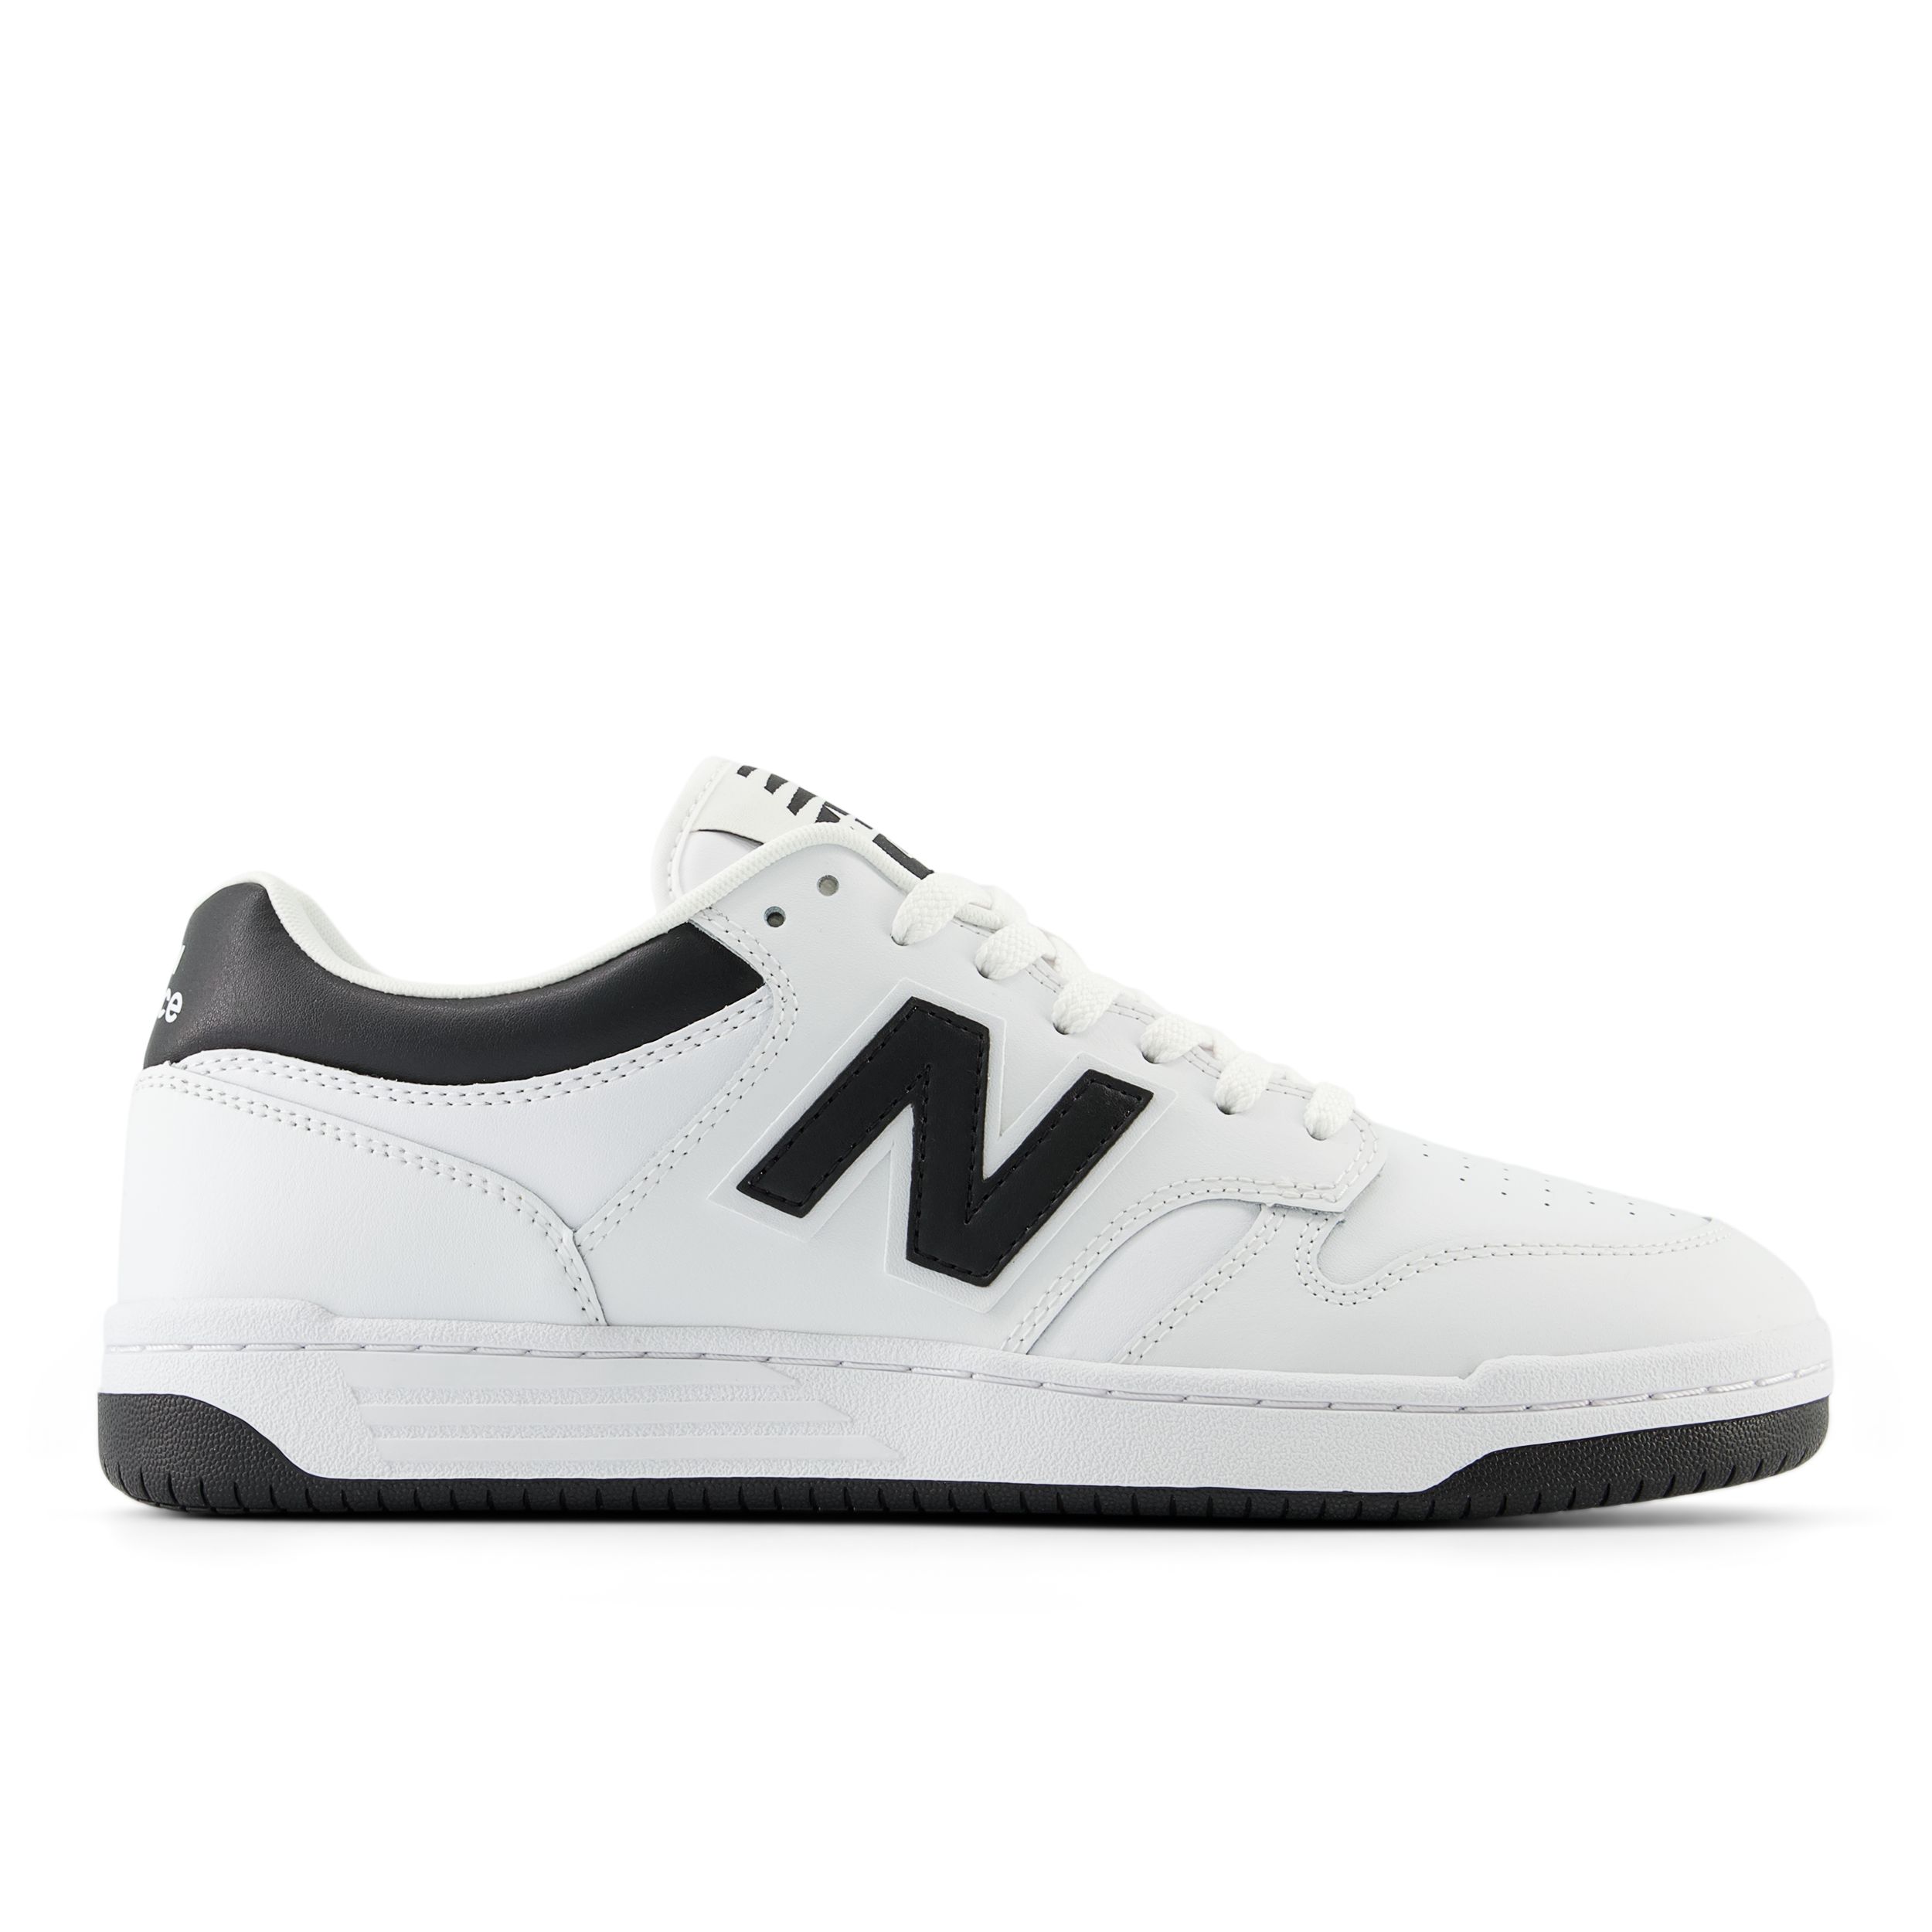 Image of New Balance Men's Bb480 Shoes